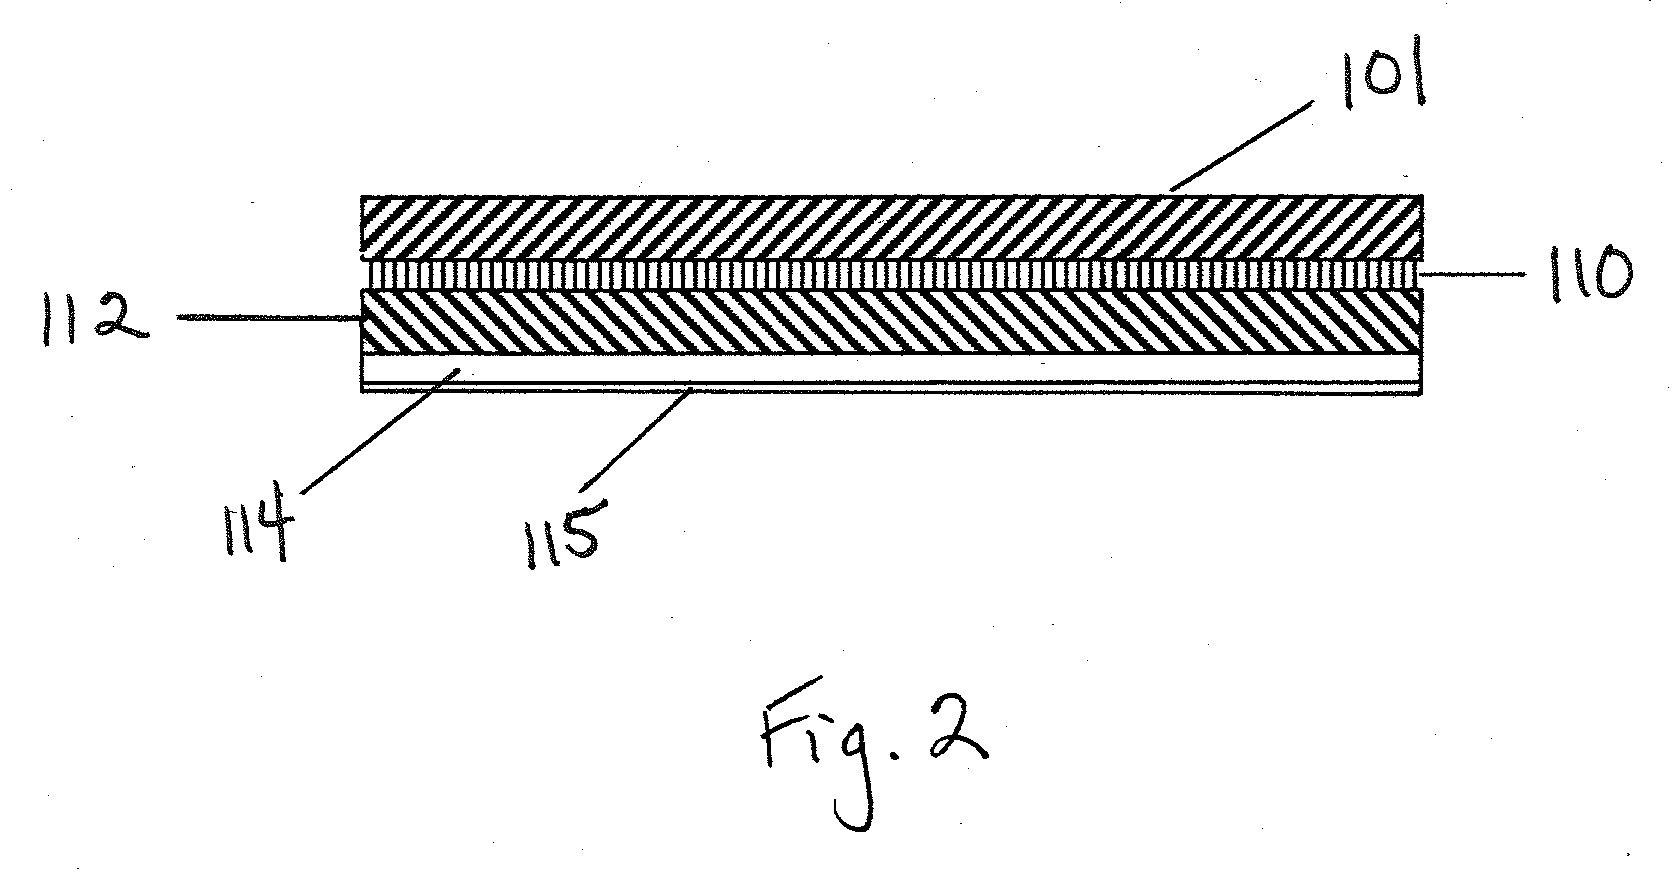 Layered structure for use with high power light emitting diode systems